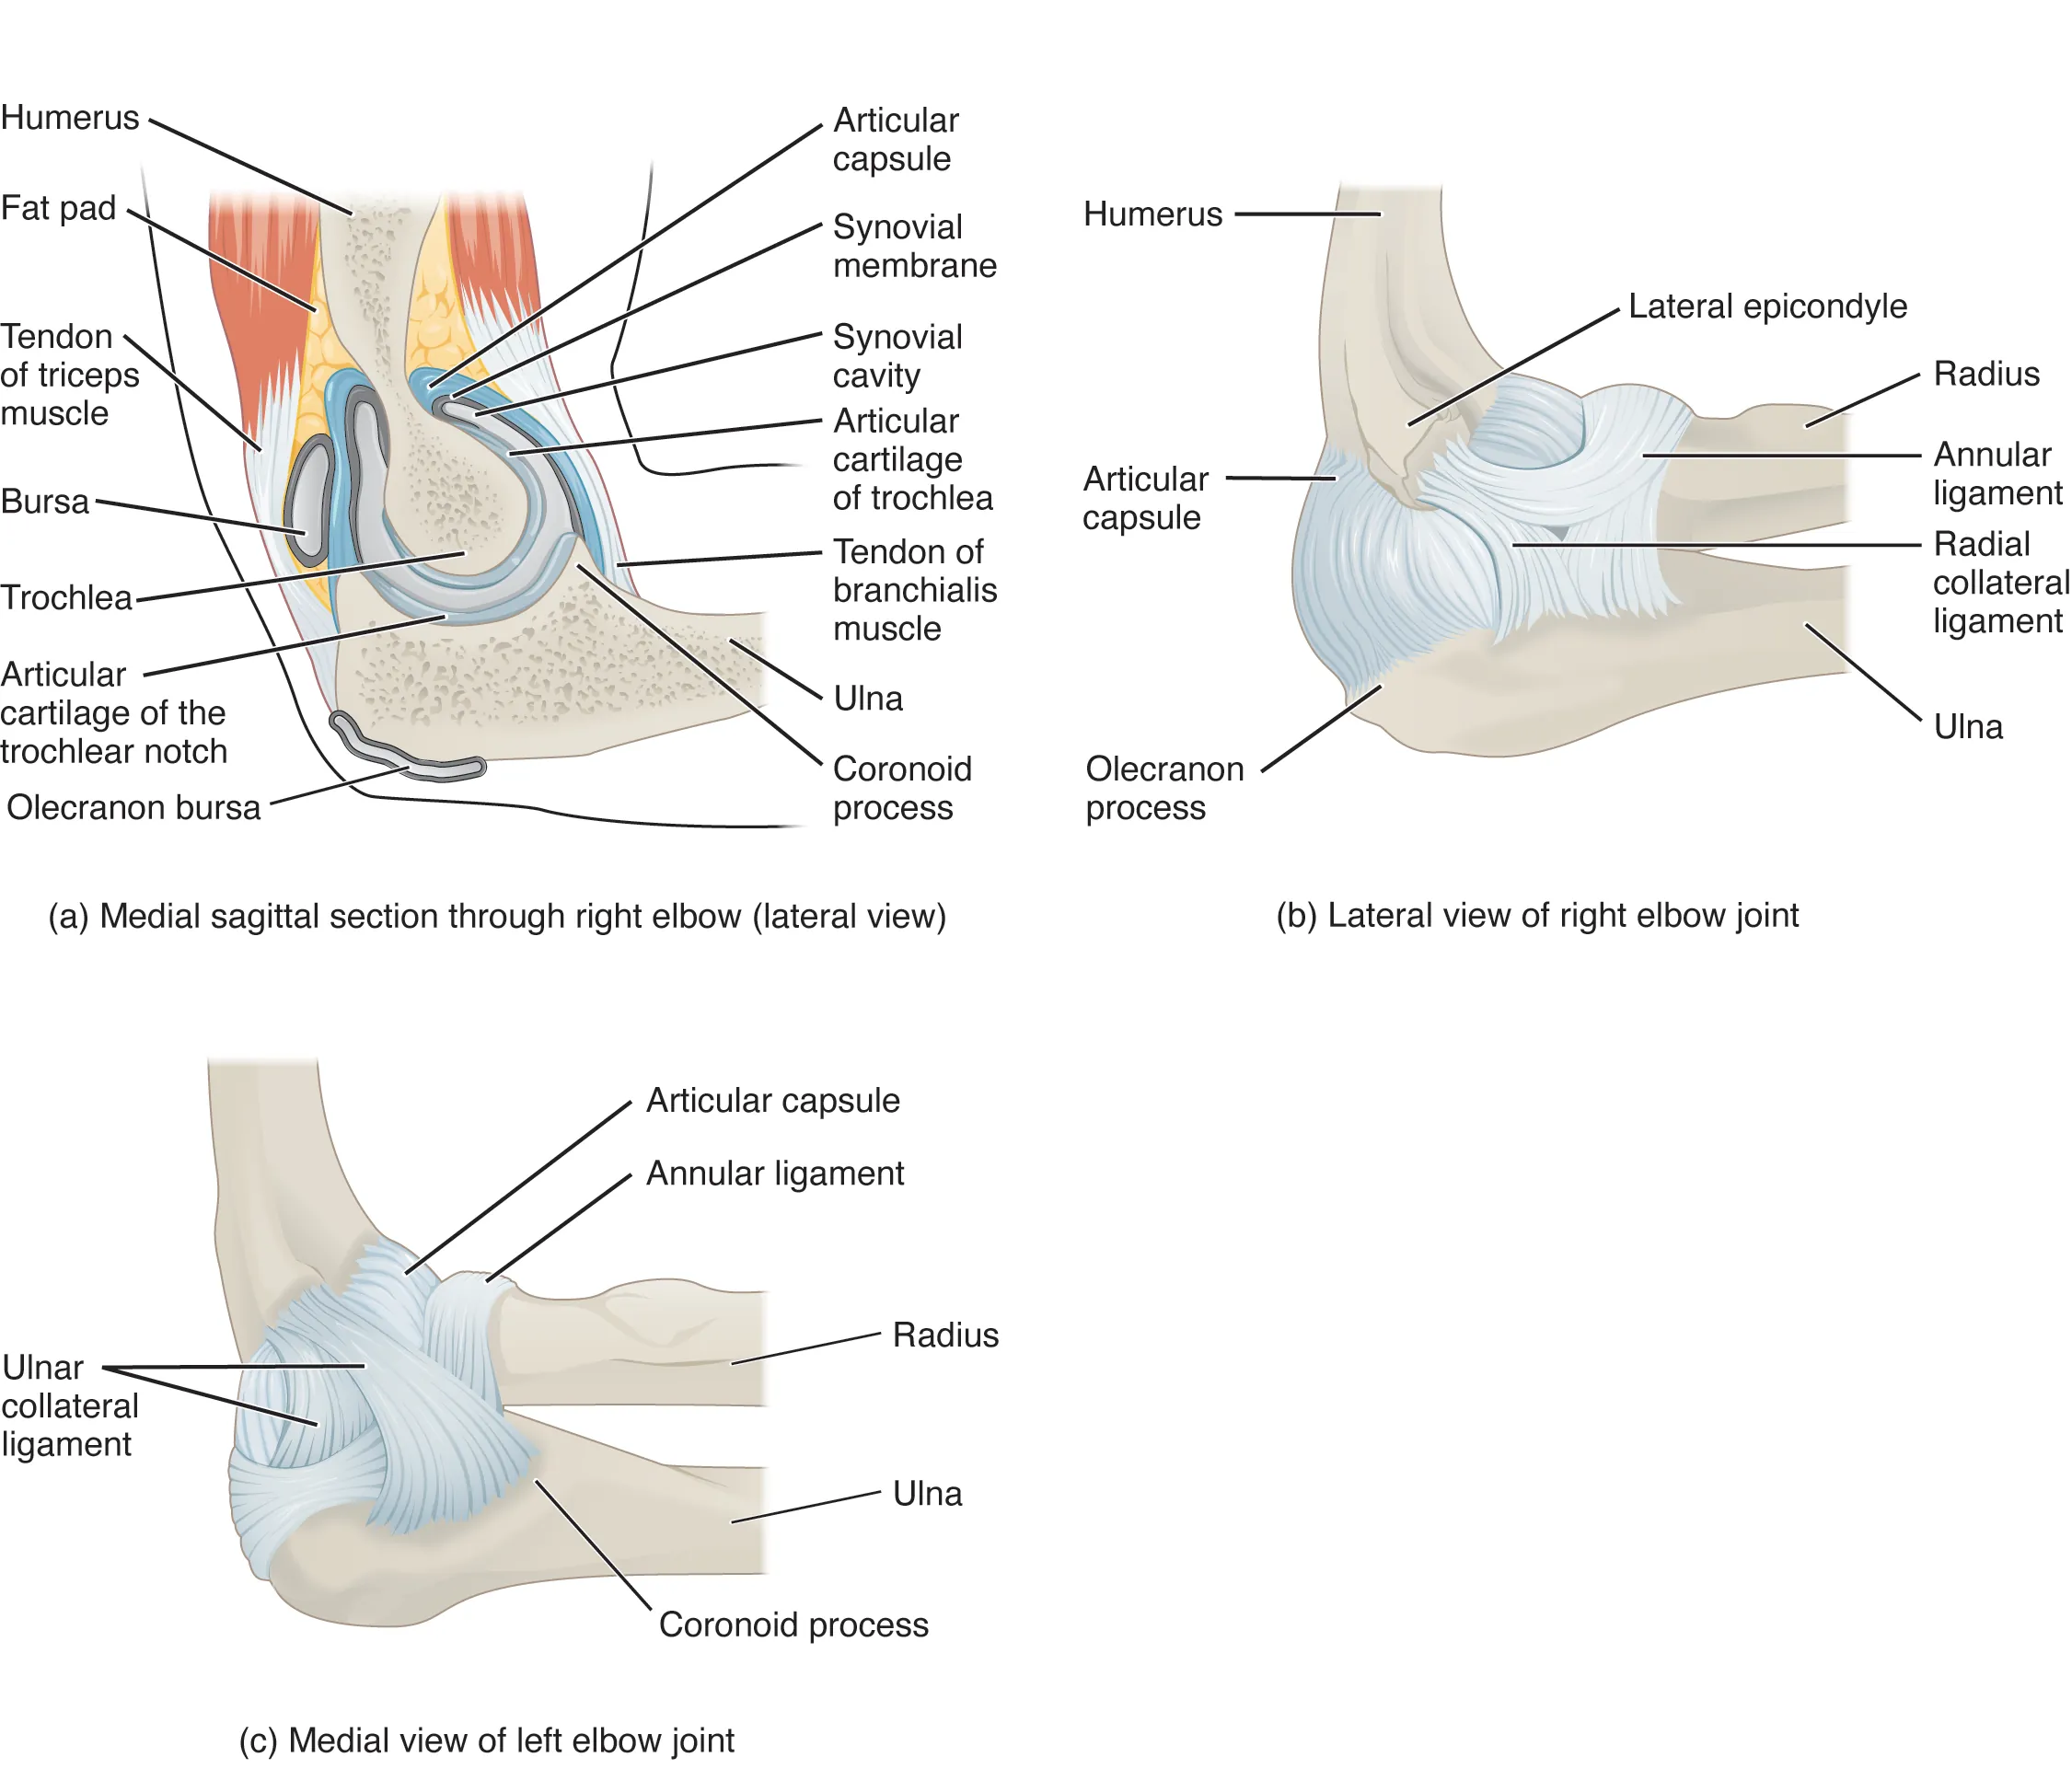 This figure shows the structure of the elbow joint. The top, left panel shows the medial sagittal section of the right elbow joint. The top, right panel shows the lateral view of the right elbow joint, and the bottom, left panel shows the medial view of the right elbow joint.